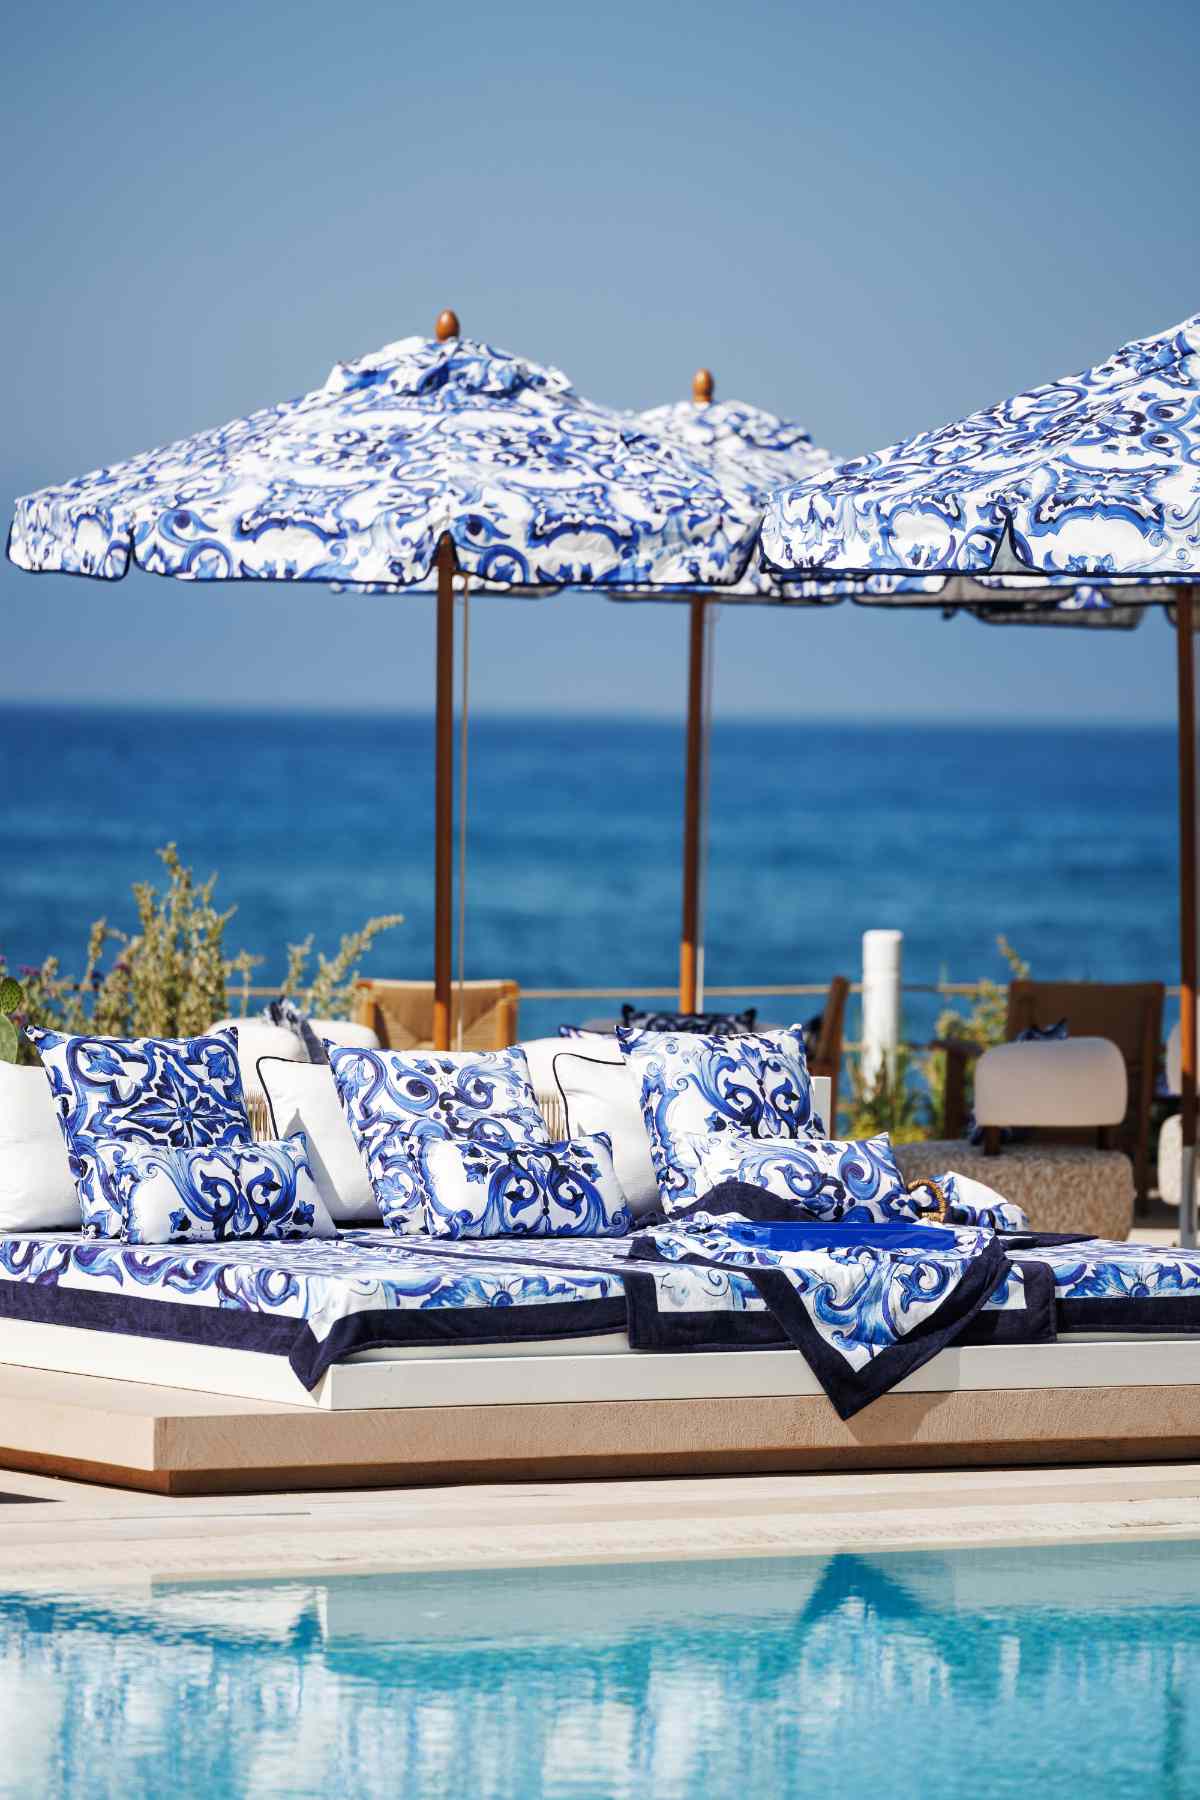 Dolce&Gabbana Brings Its Unique Style To The Most Exclusive Beach Clubs In Europe